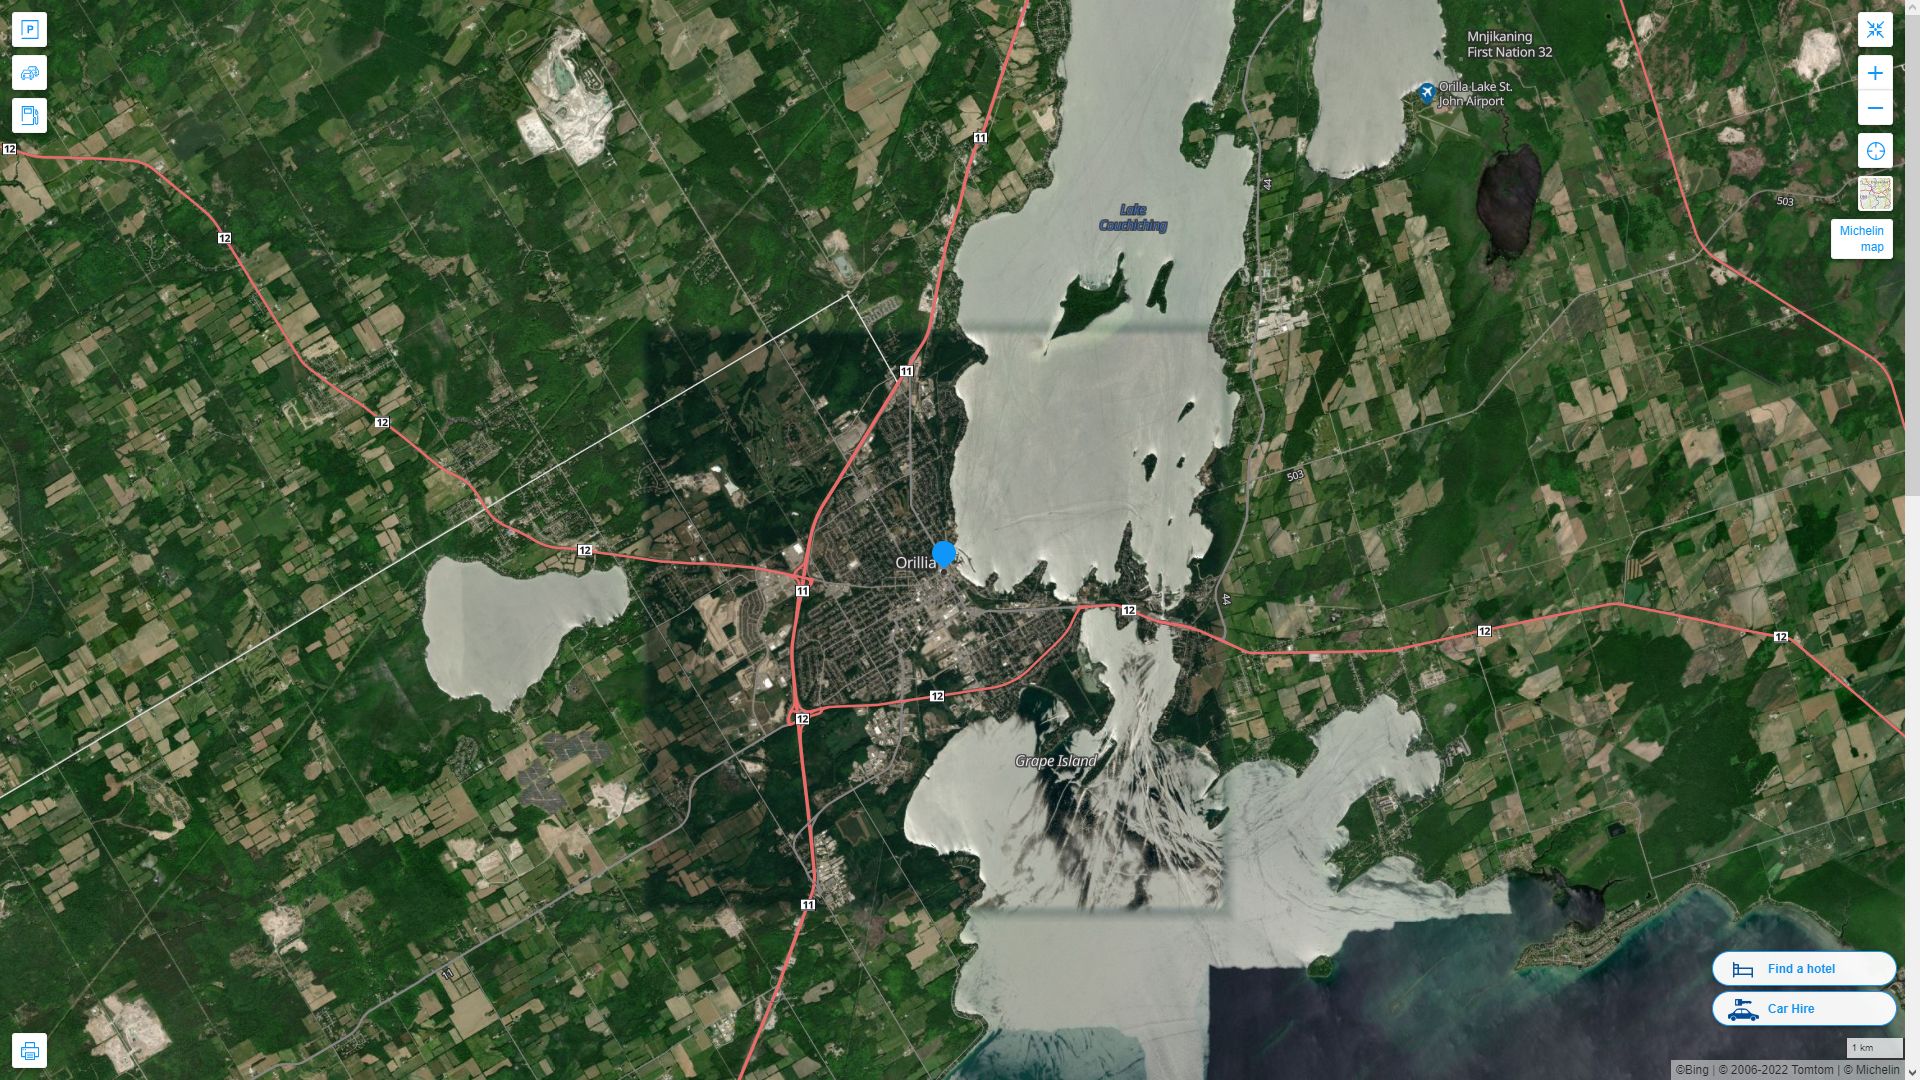 Orillia Highway and Road Map with Satellite View